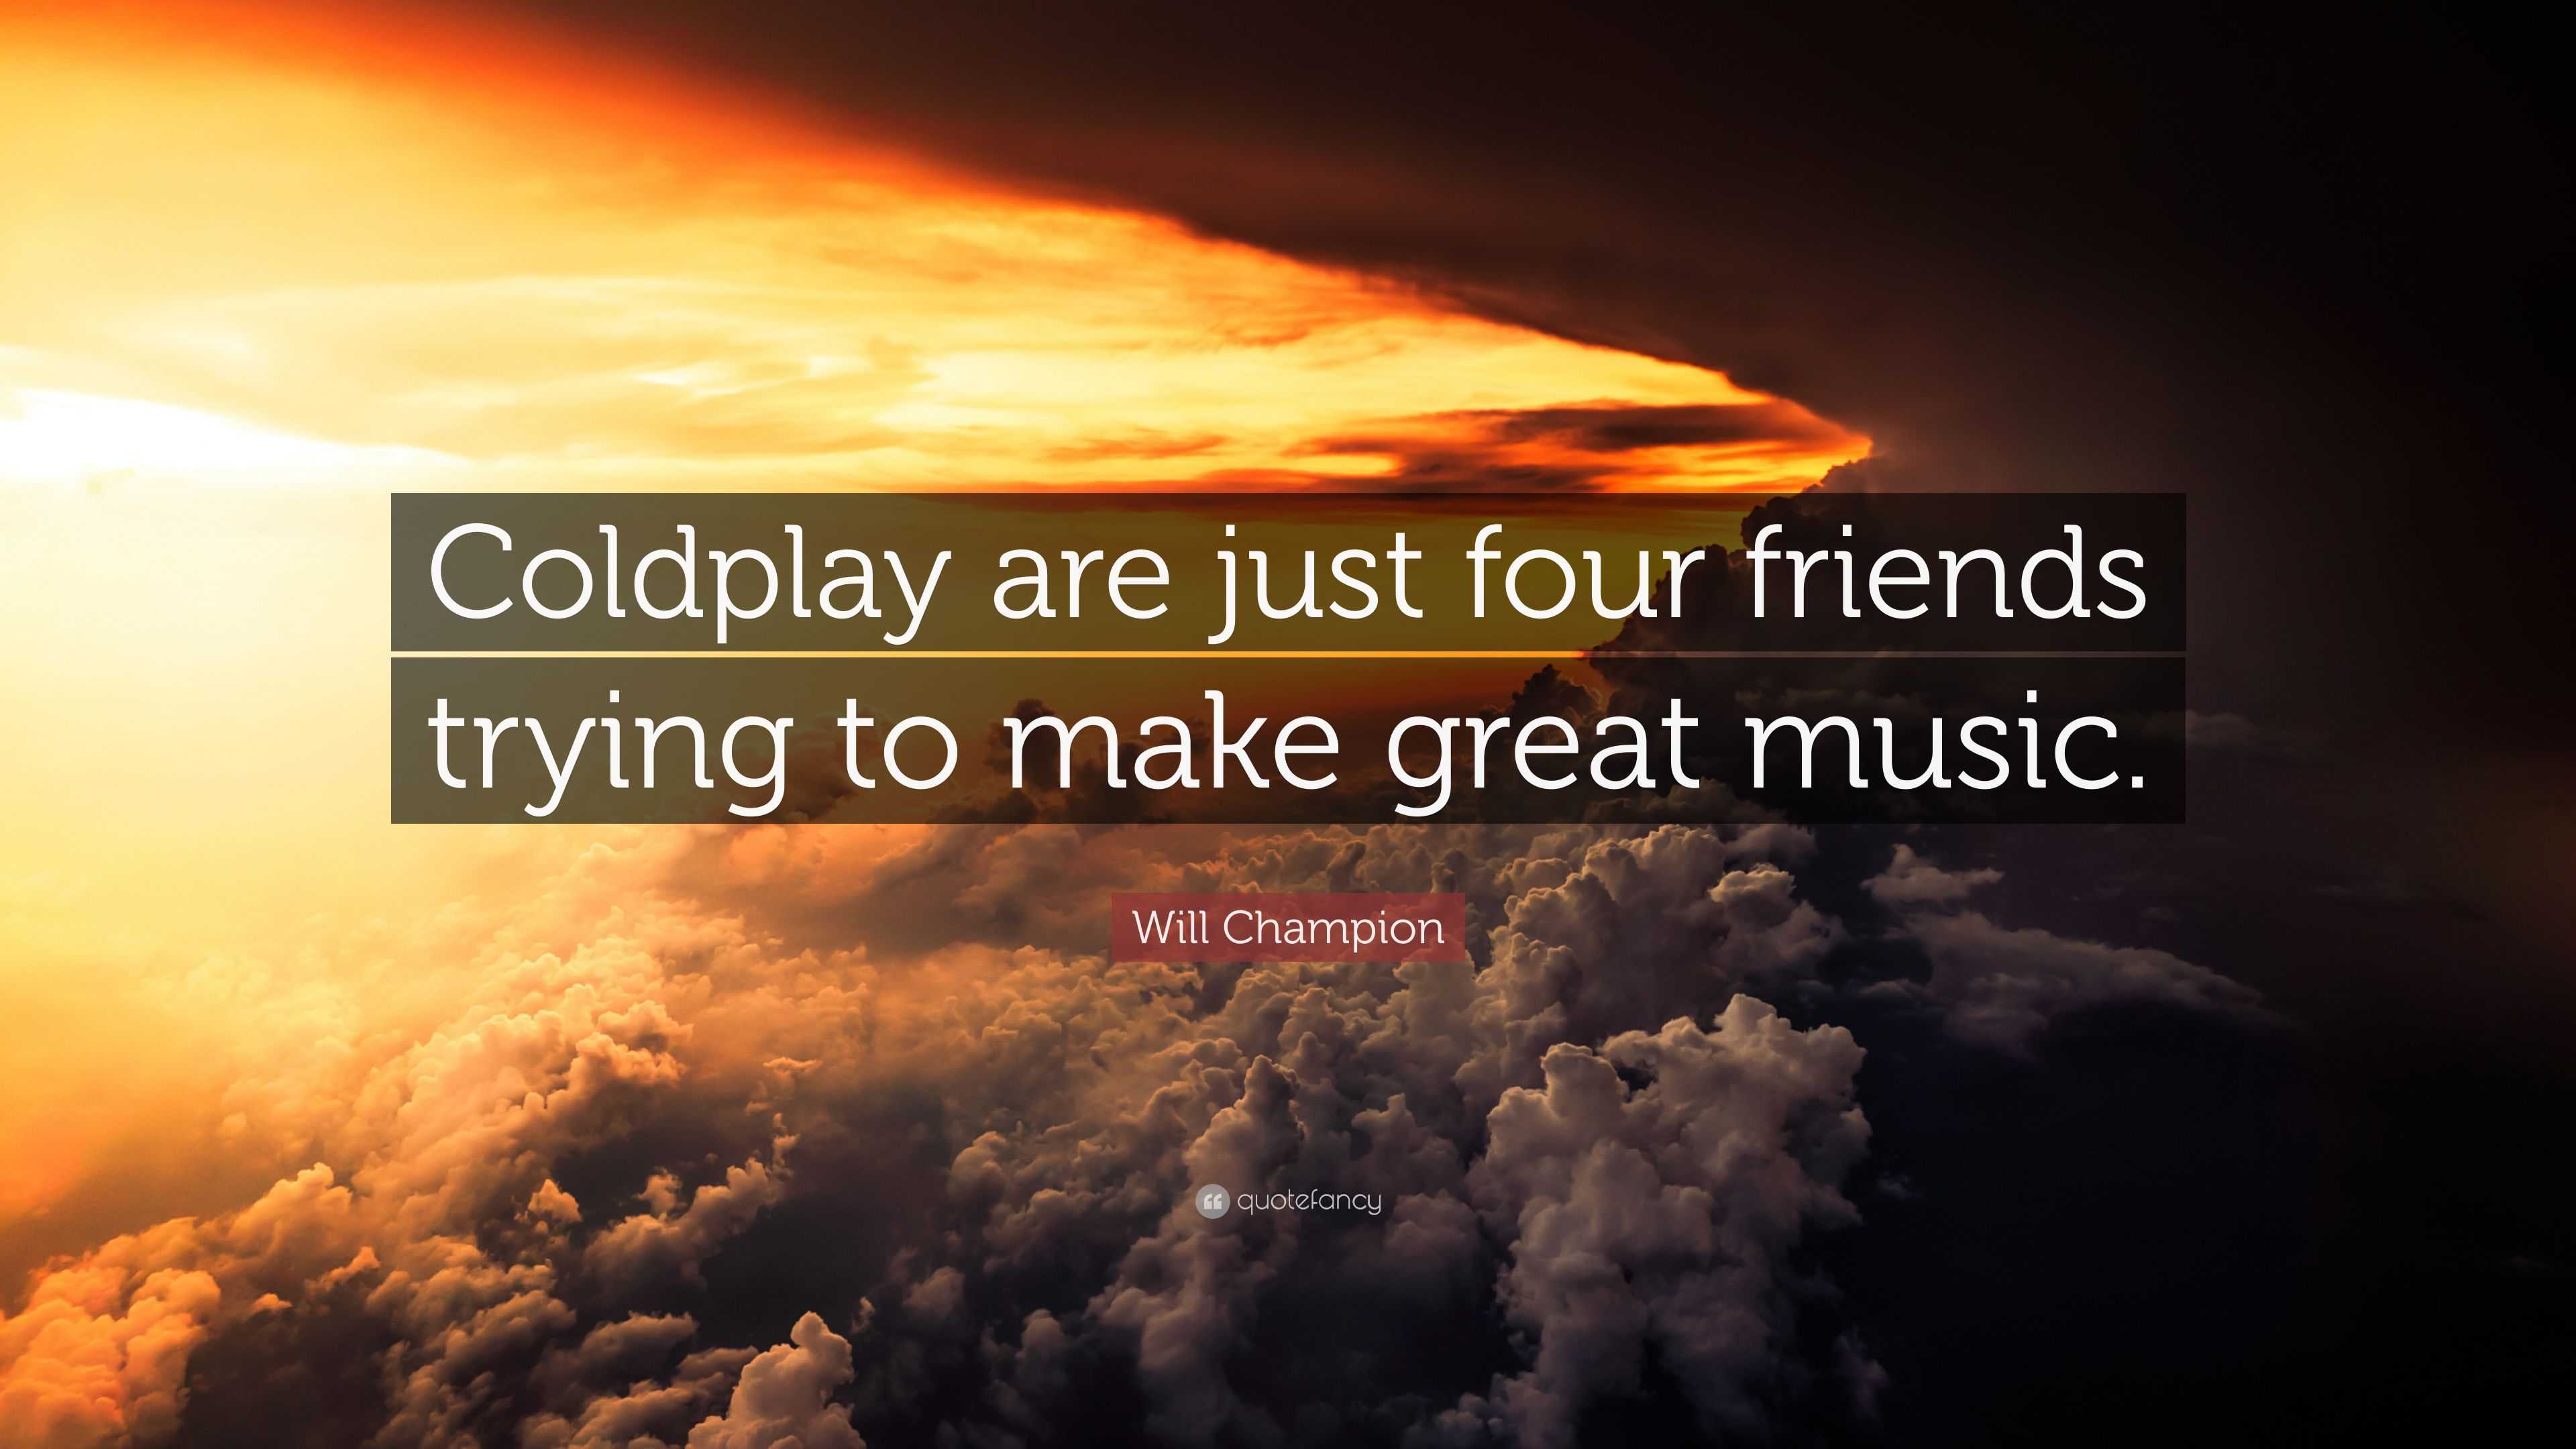 Will Champion Quote: “Coldplay are just four friends trying to